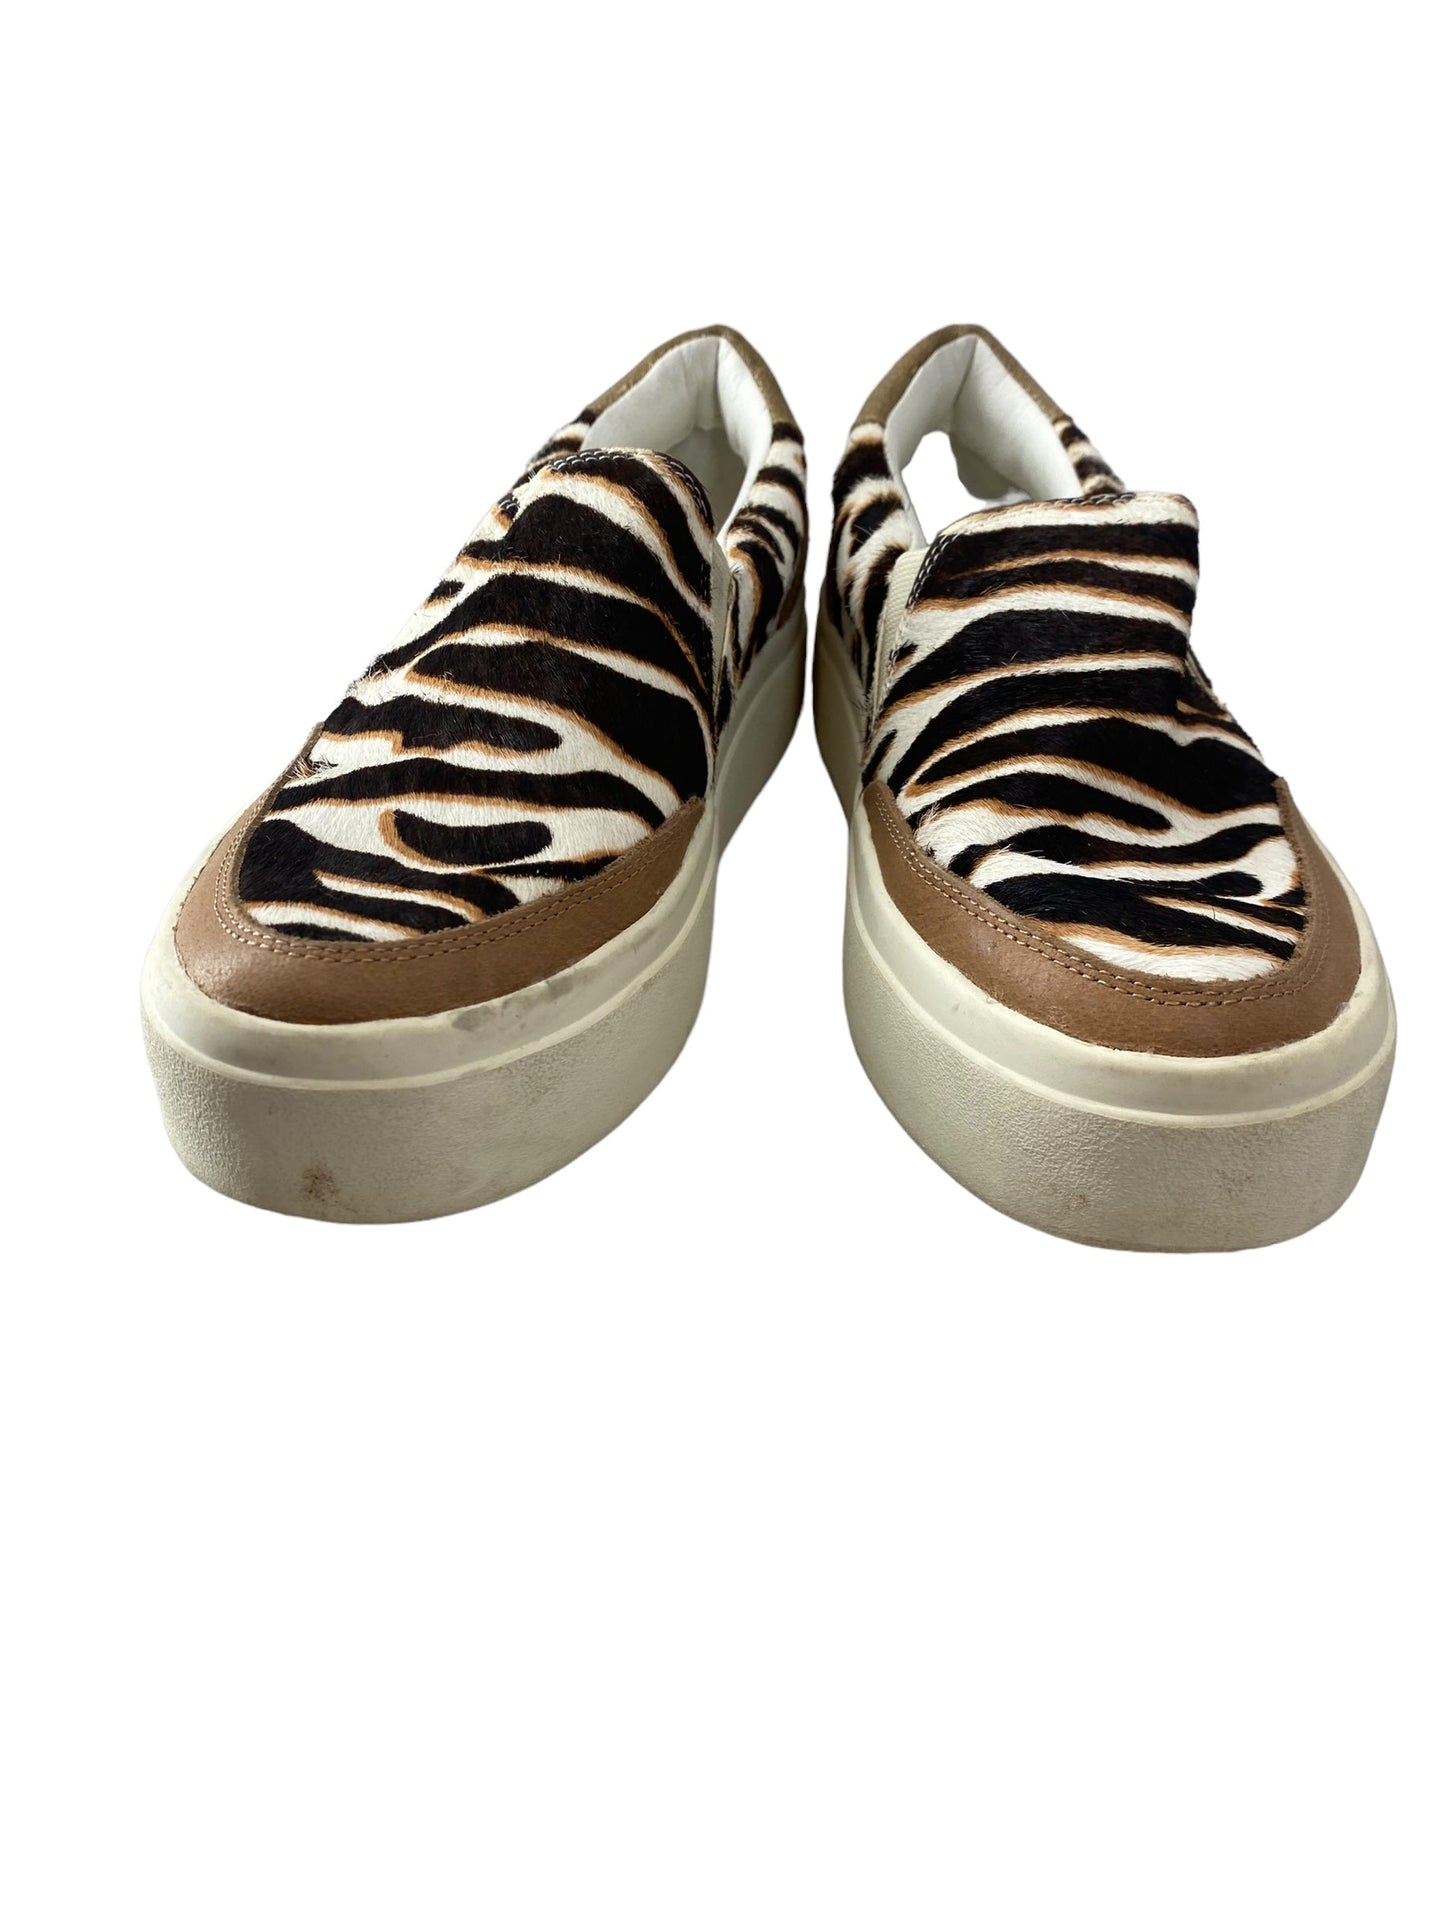 Shoes Sneakers By Lucky Brand  Size: 6